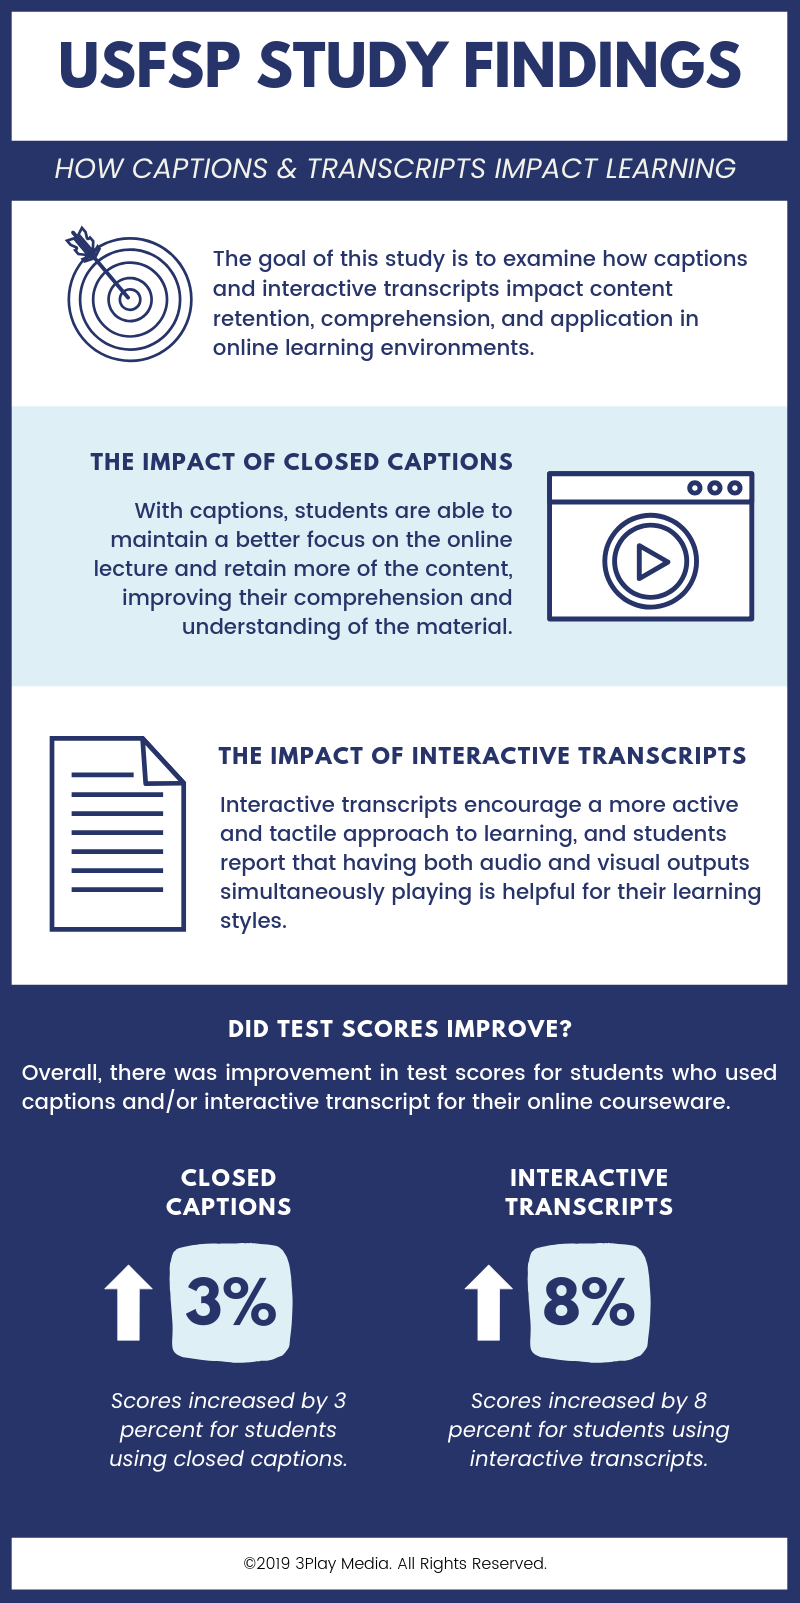 Infographic with findings from the USFSP captioning and interactive transcript study. Overall, captions and transcript show to improve students online learning experience in many ways, and after one semester, exam scores improved by 3-8% after using captions and interactive transcripts. The information in this infographic is also written throughout the content of this blog.